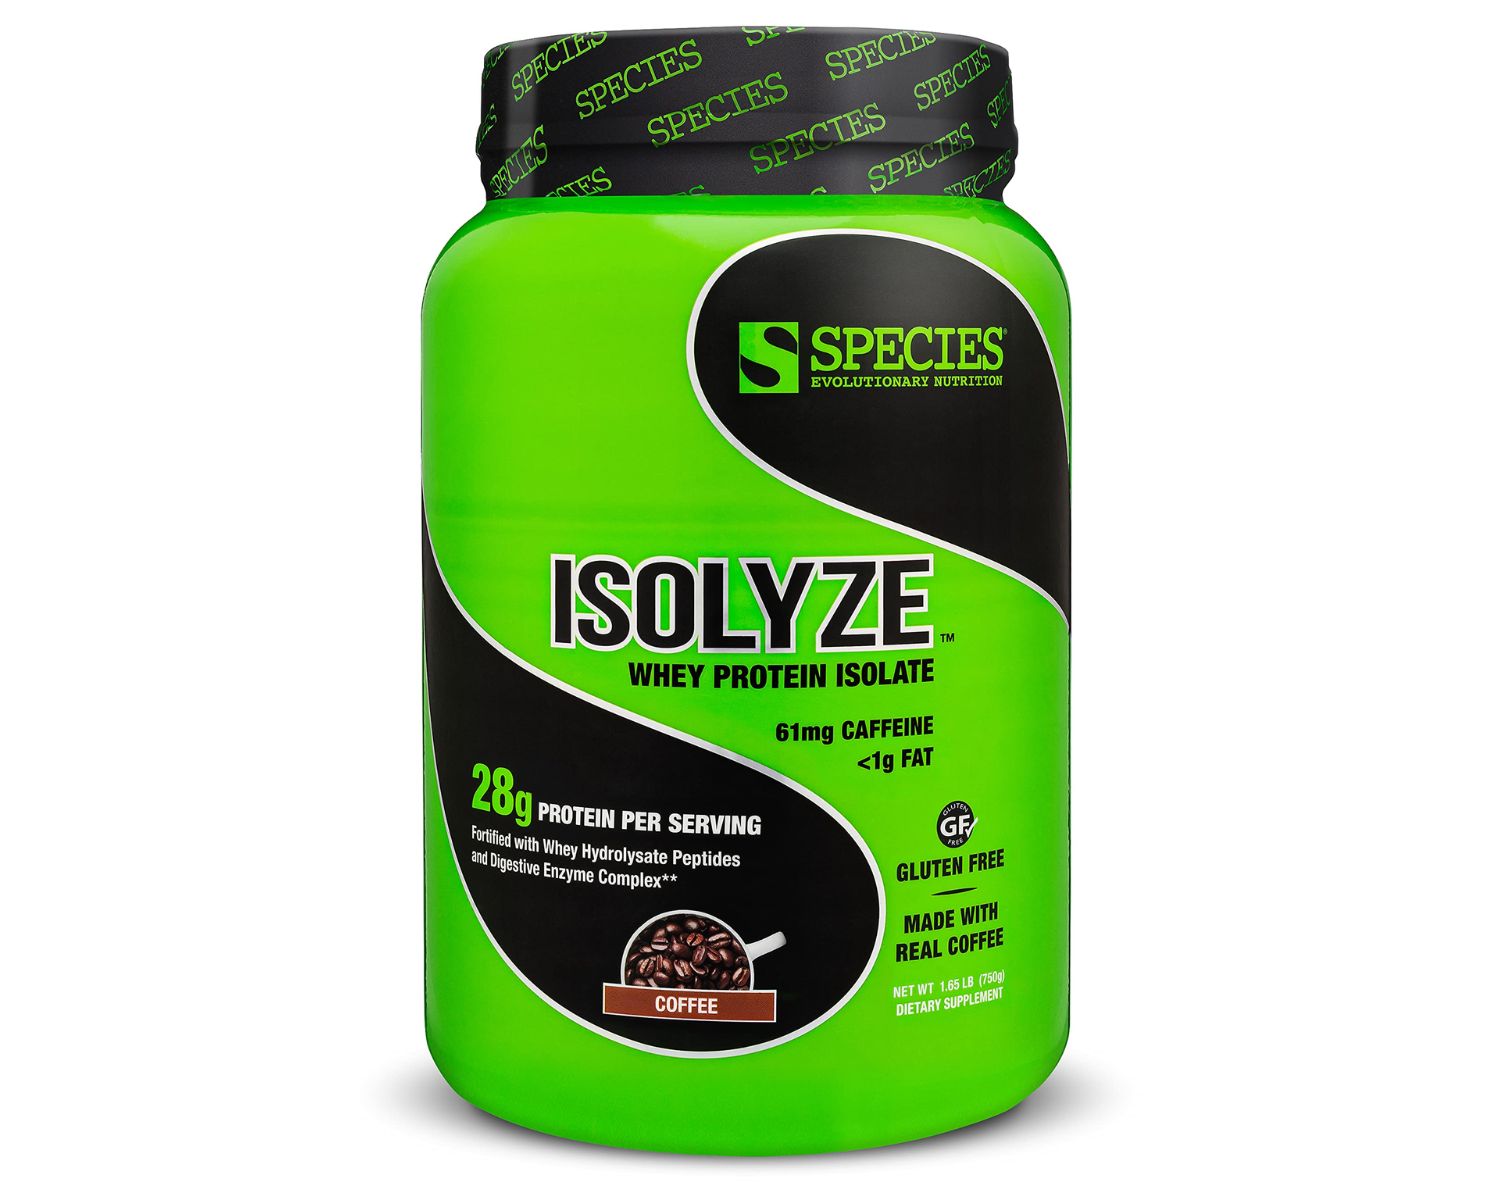 15-isolyze-protein-nutrition-facts